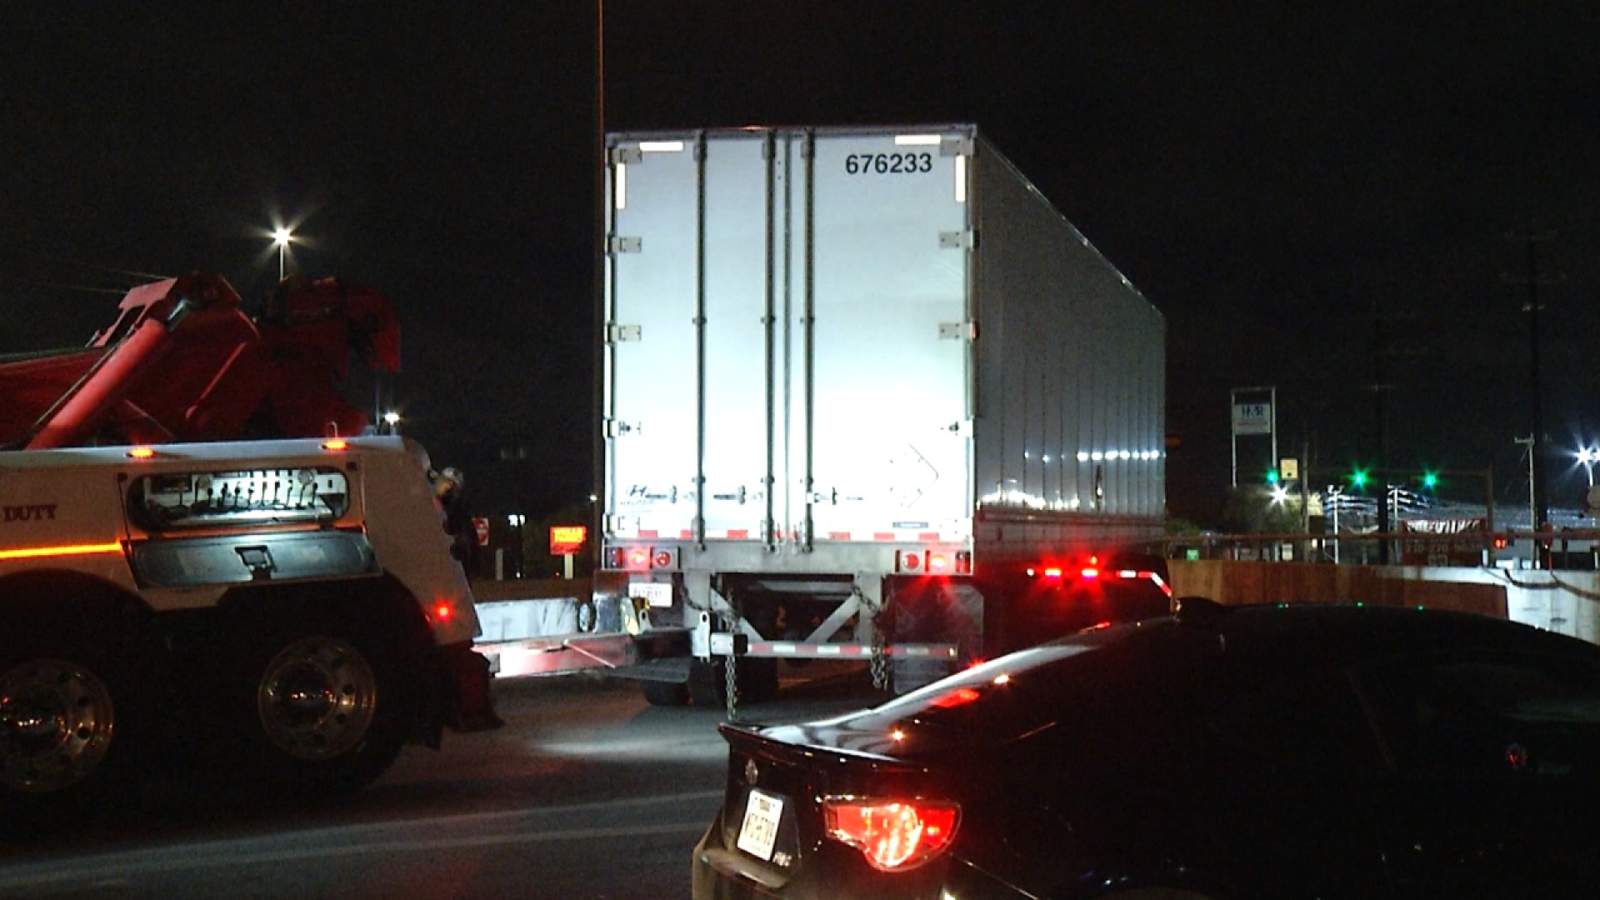 Driver of 18-wheeler fails to navigate turn, damages bridge, police say